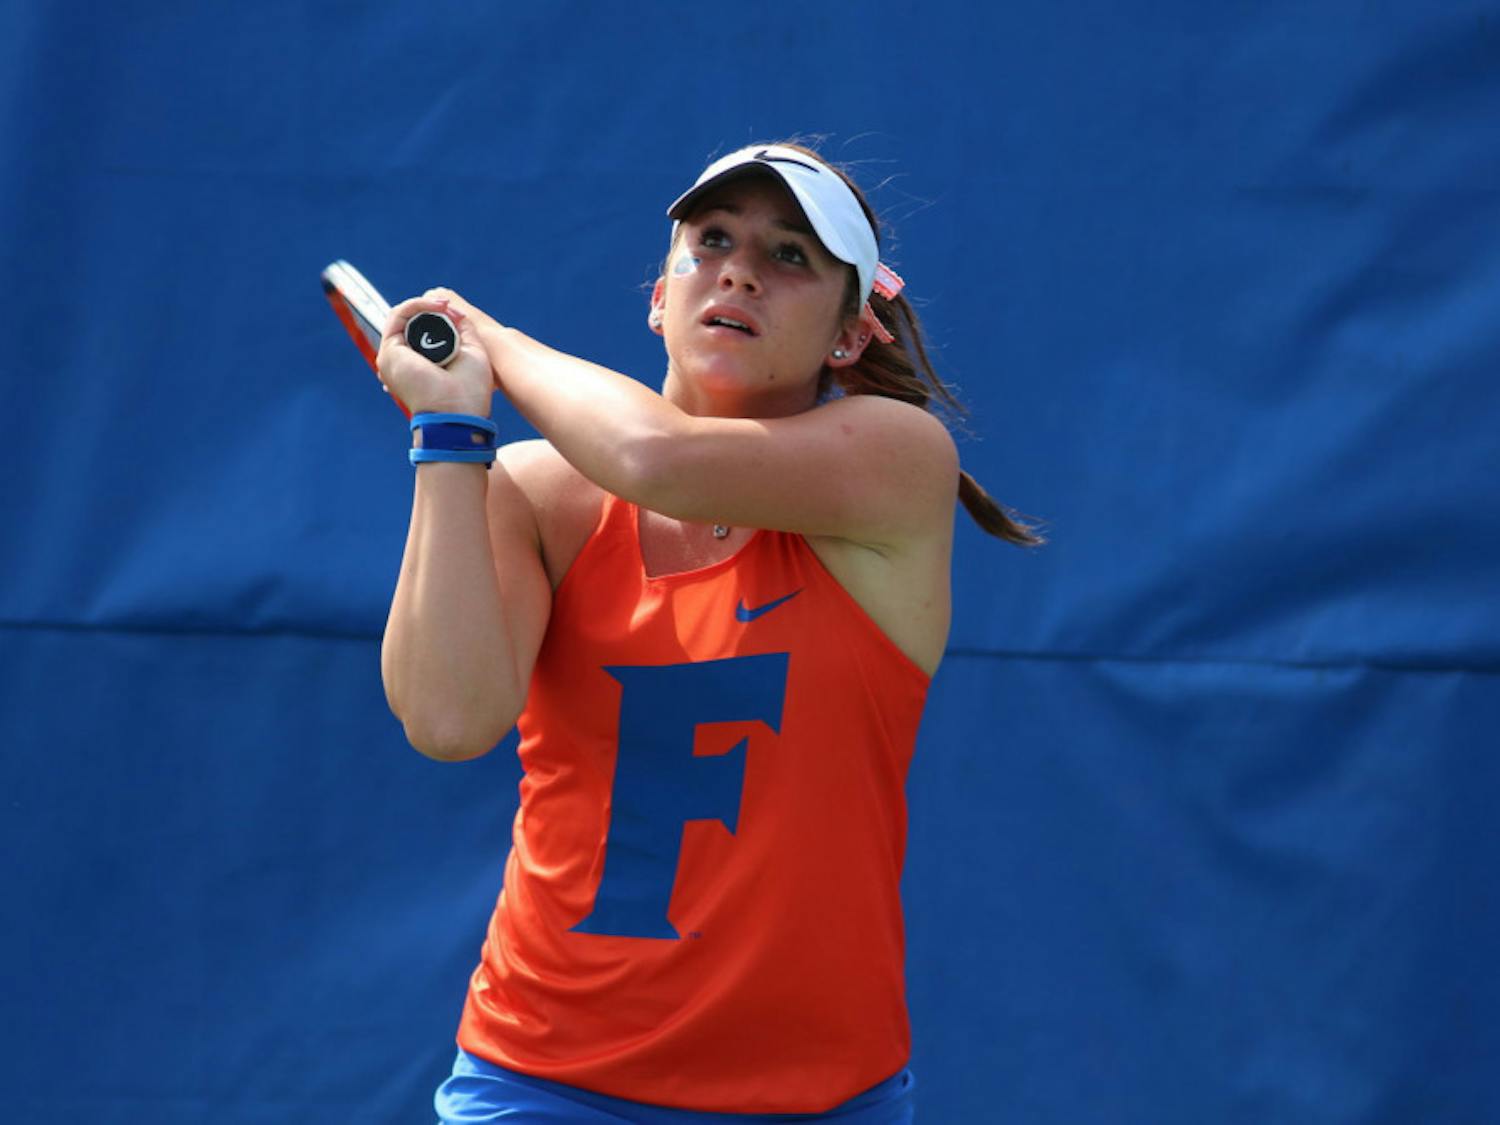 Victoria Emma claimed Florida's third point of the match in Sunday's&nbsp;4-2 upset win over No. 16 Tennessee.